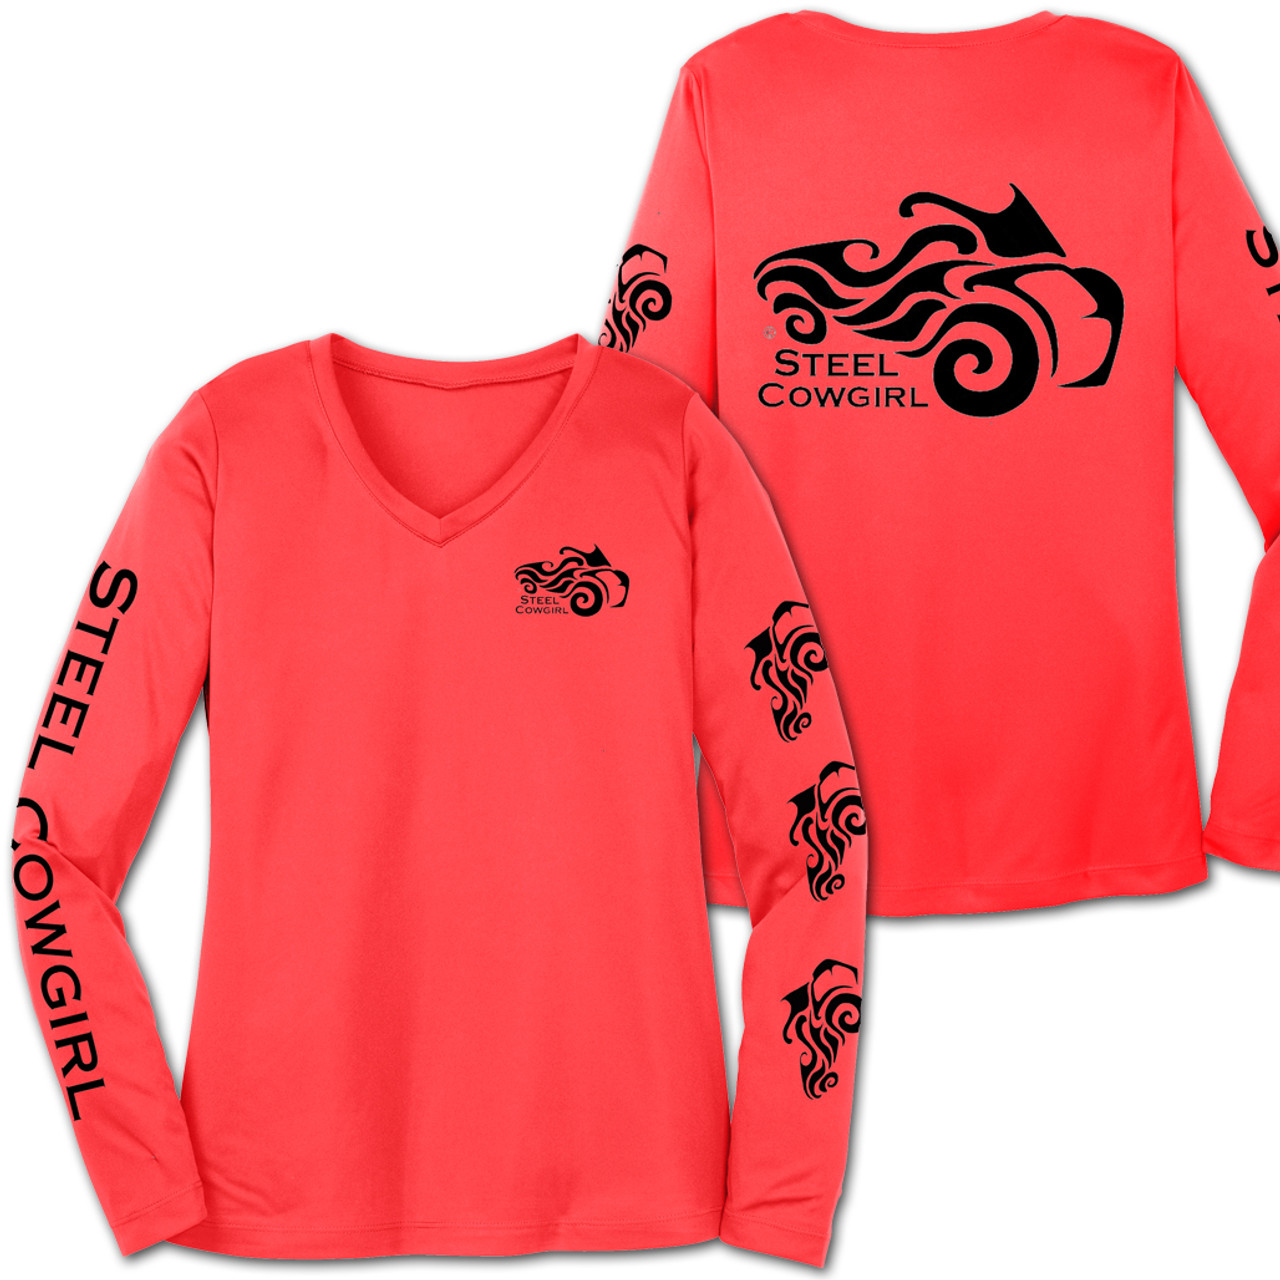 Bright Coral Wicking Steel Cowgirl Spyder / Ryker Motorcycle Shirt